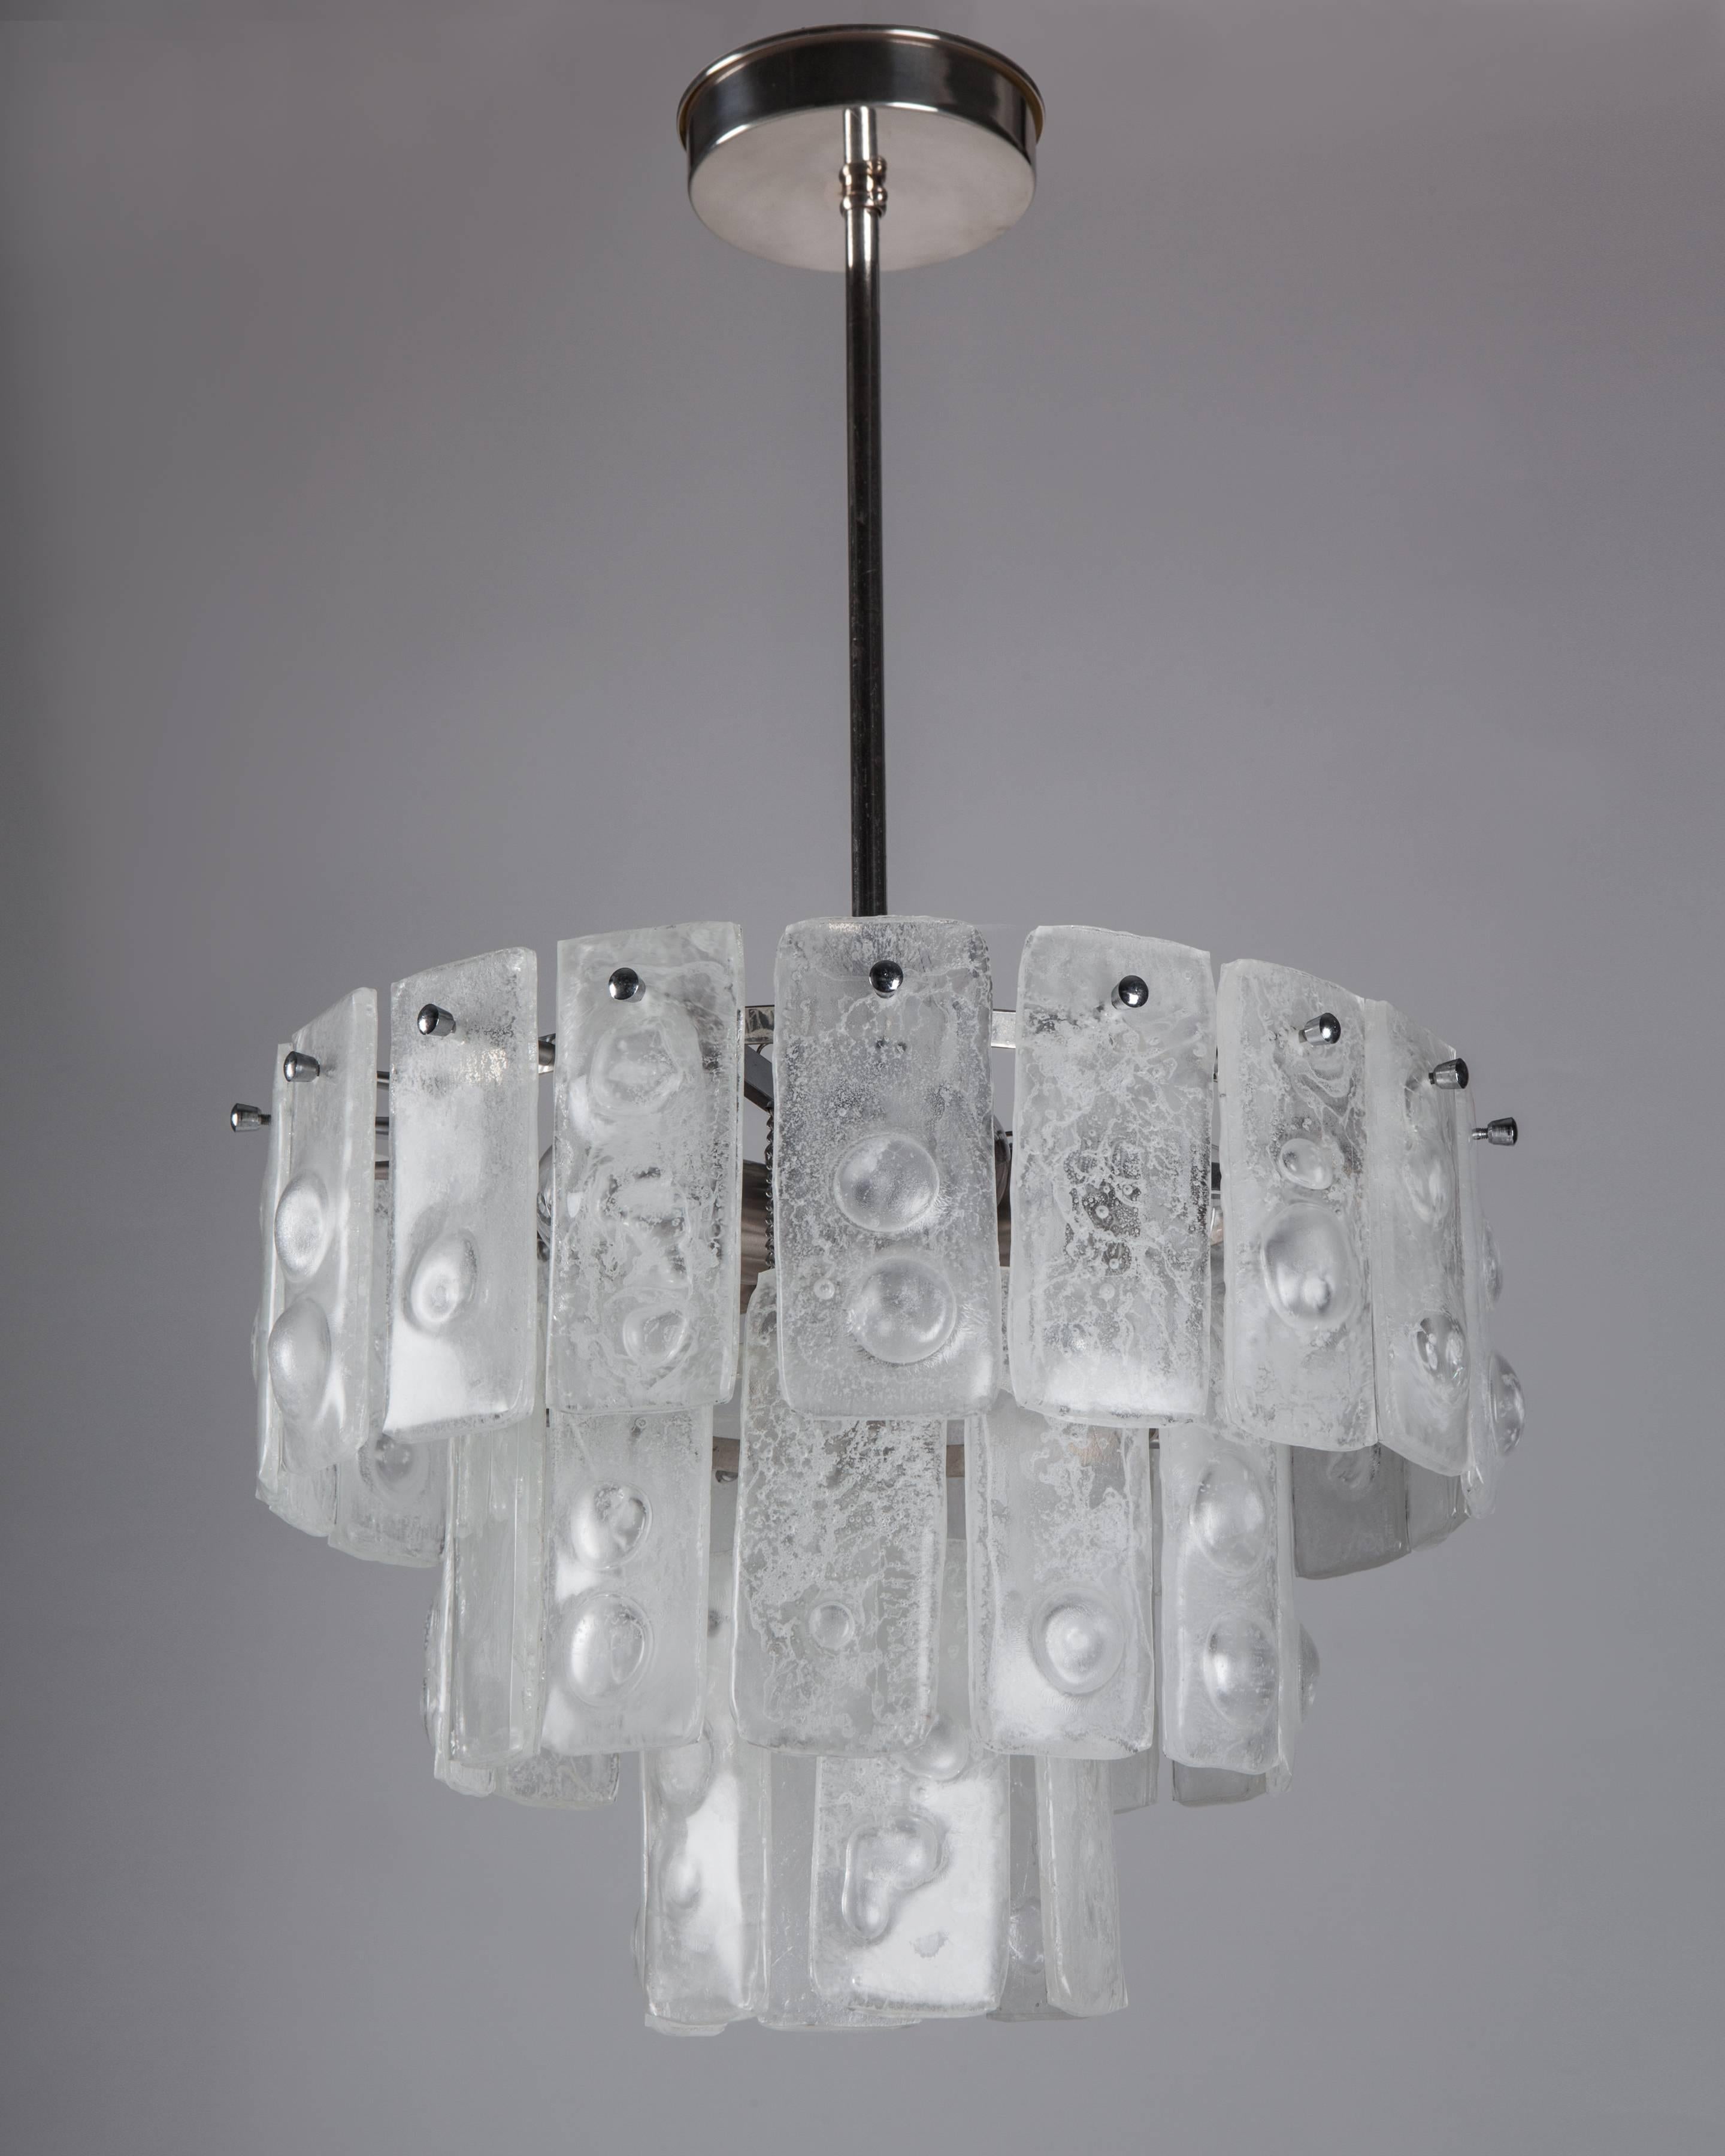 AHL4051

A three-tier vintage modernist chandelier having a chrome, nickel and silver plate frame dressed with handblown and formed seeded, bubbled glass tiles. Due to the antique nature of this fixture, there may be some nicks or imperfections in